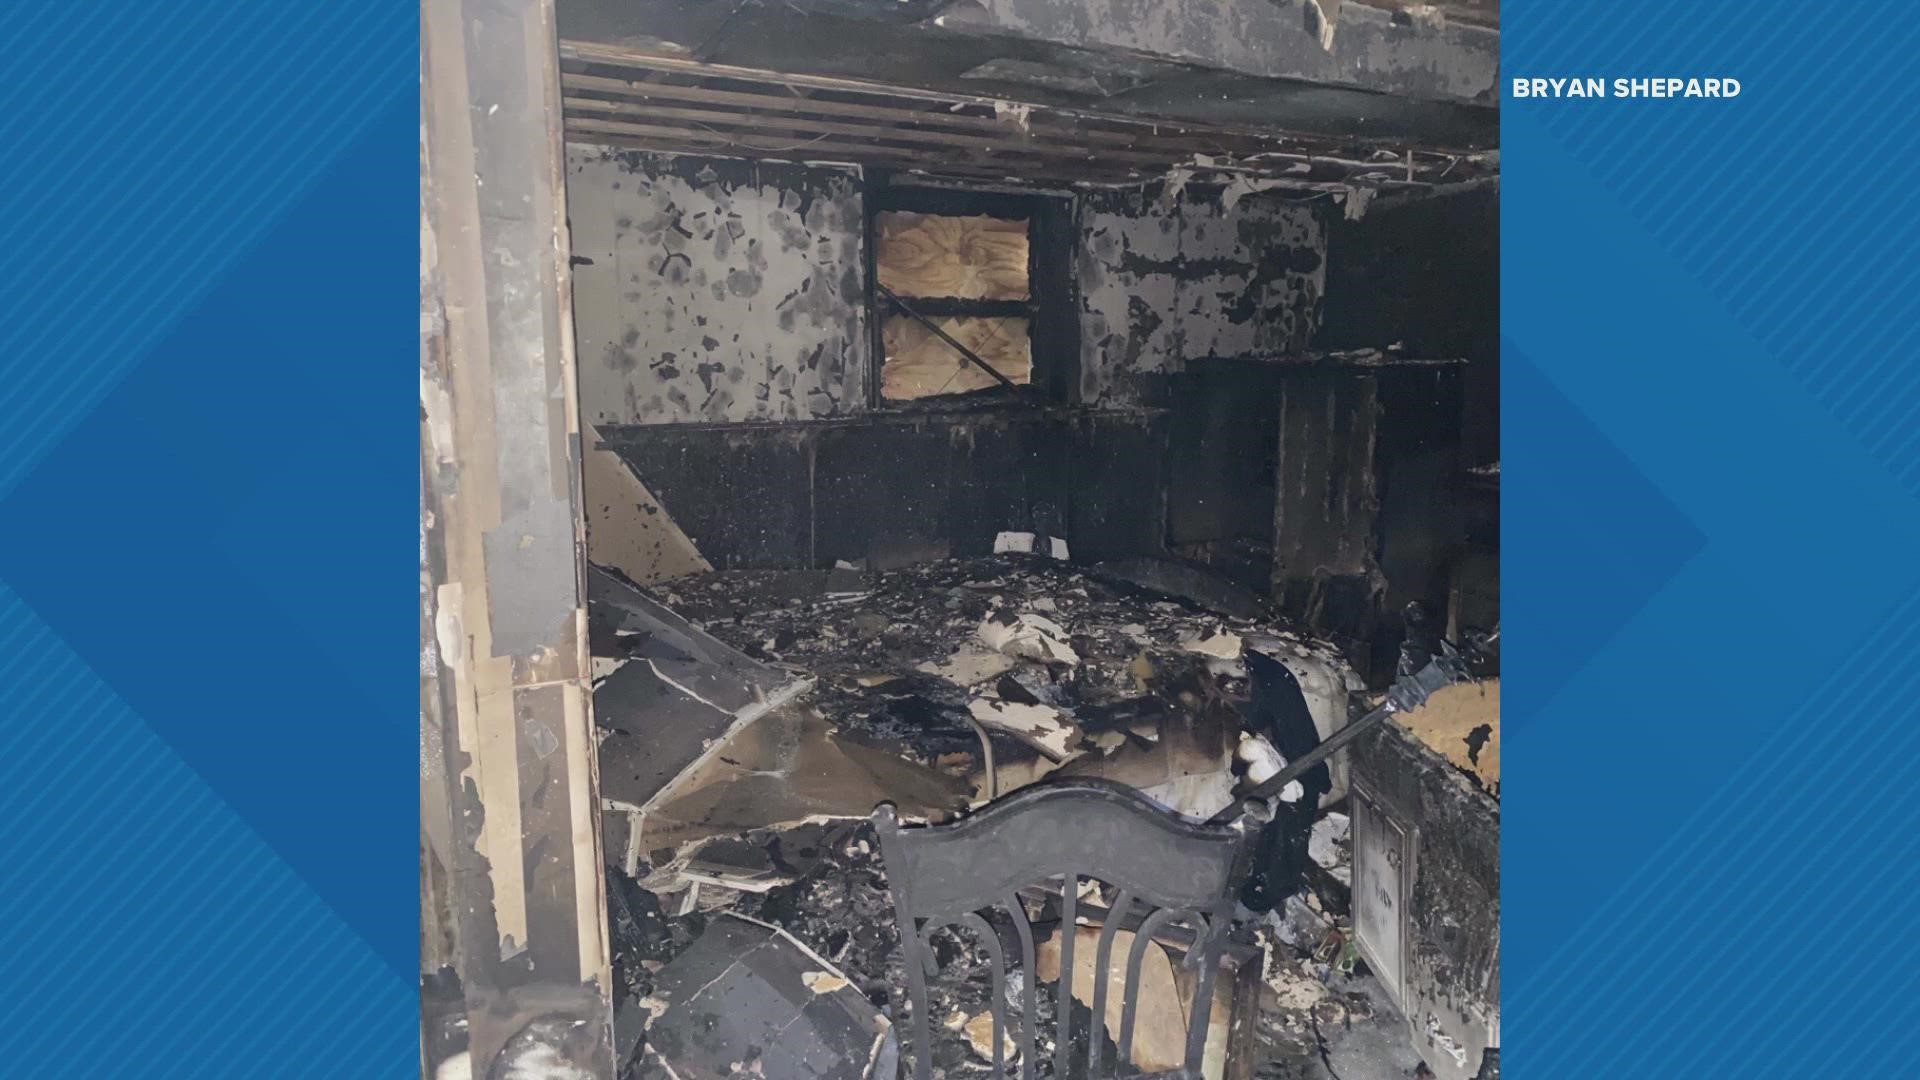 A St. Peters couple is thankful they're alive after a fire spread throughout their house. The flames caused them to lose almost everything on Thanksgiving night.